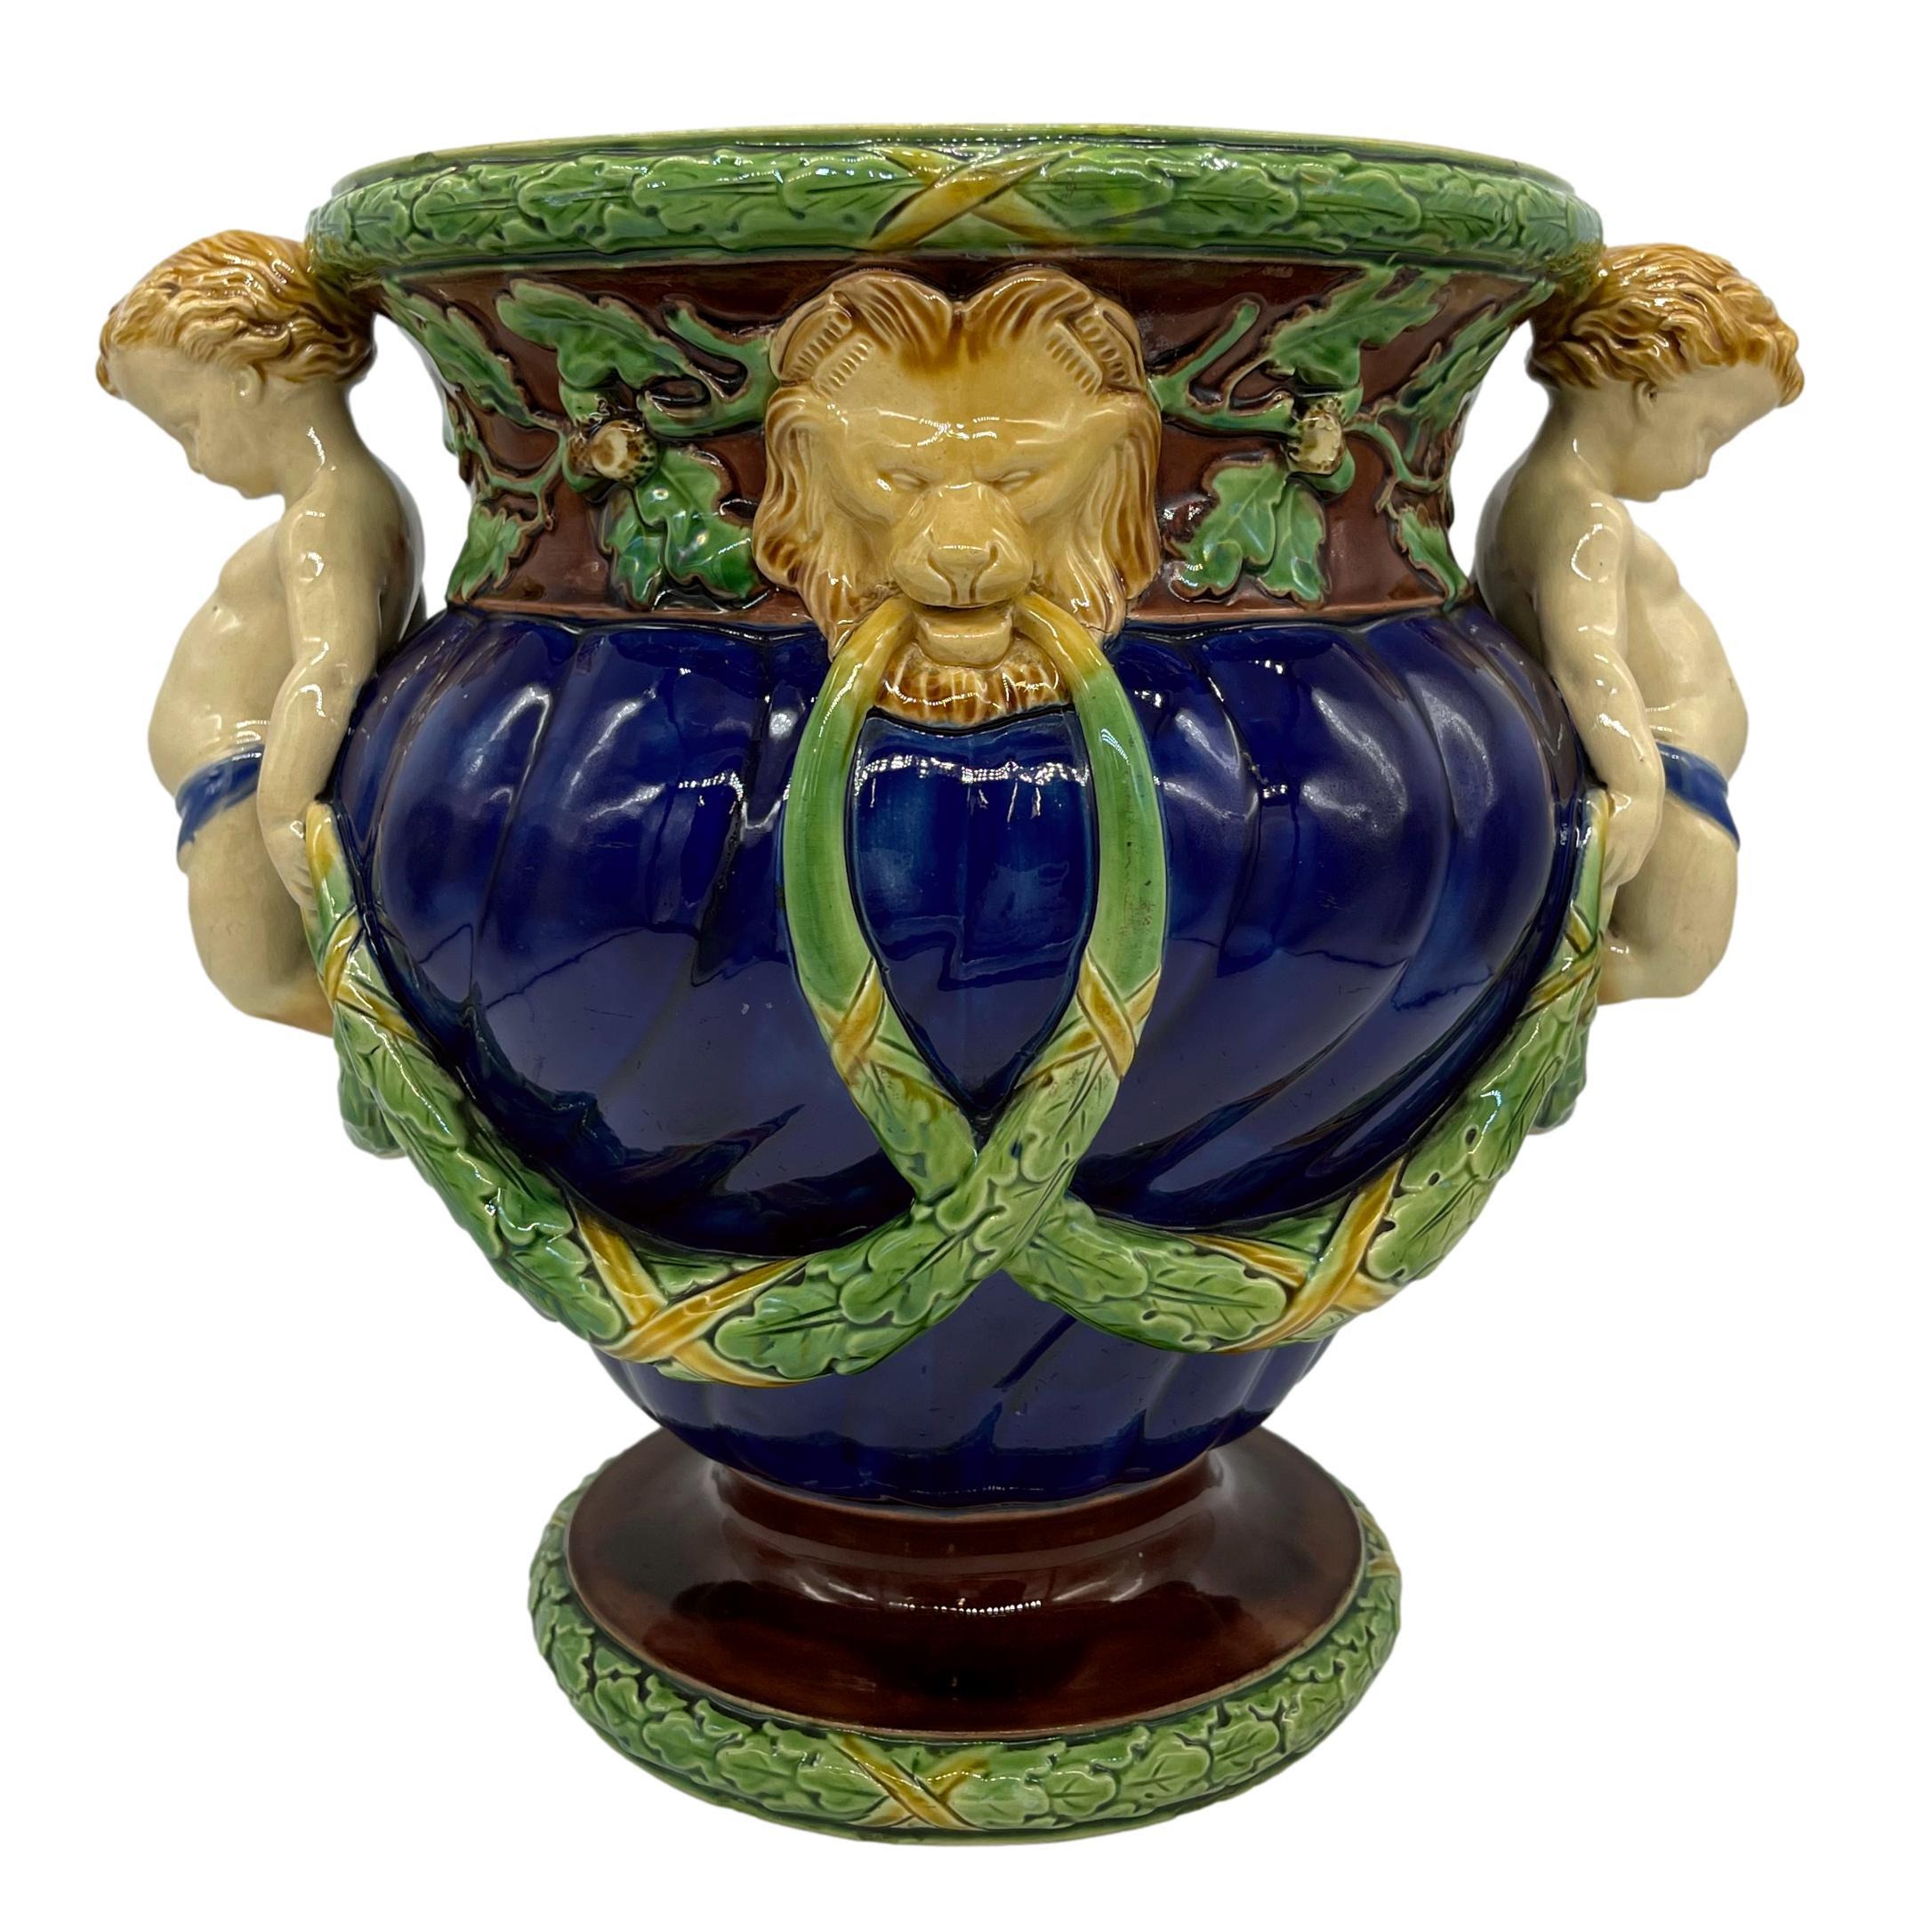 Minton Majolica wine cooler, the spiral-lobed body glazed in cobalt blue, with applied oak leaf garlands and two fauns forming the handles, the neck banded with naturalistic oak branches, leaves, and acorns, with lion mask central medallions, the